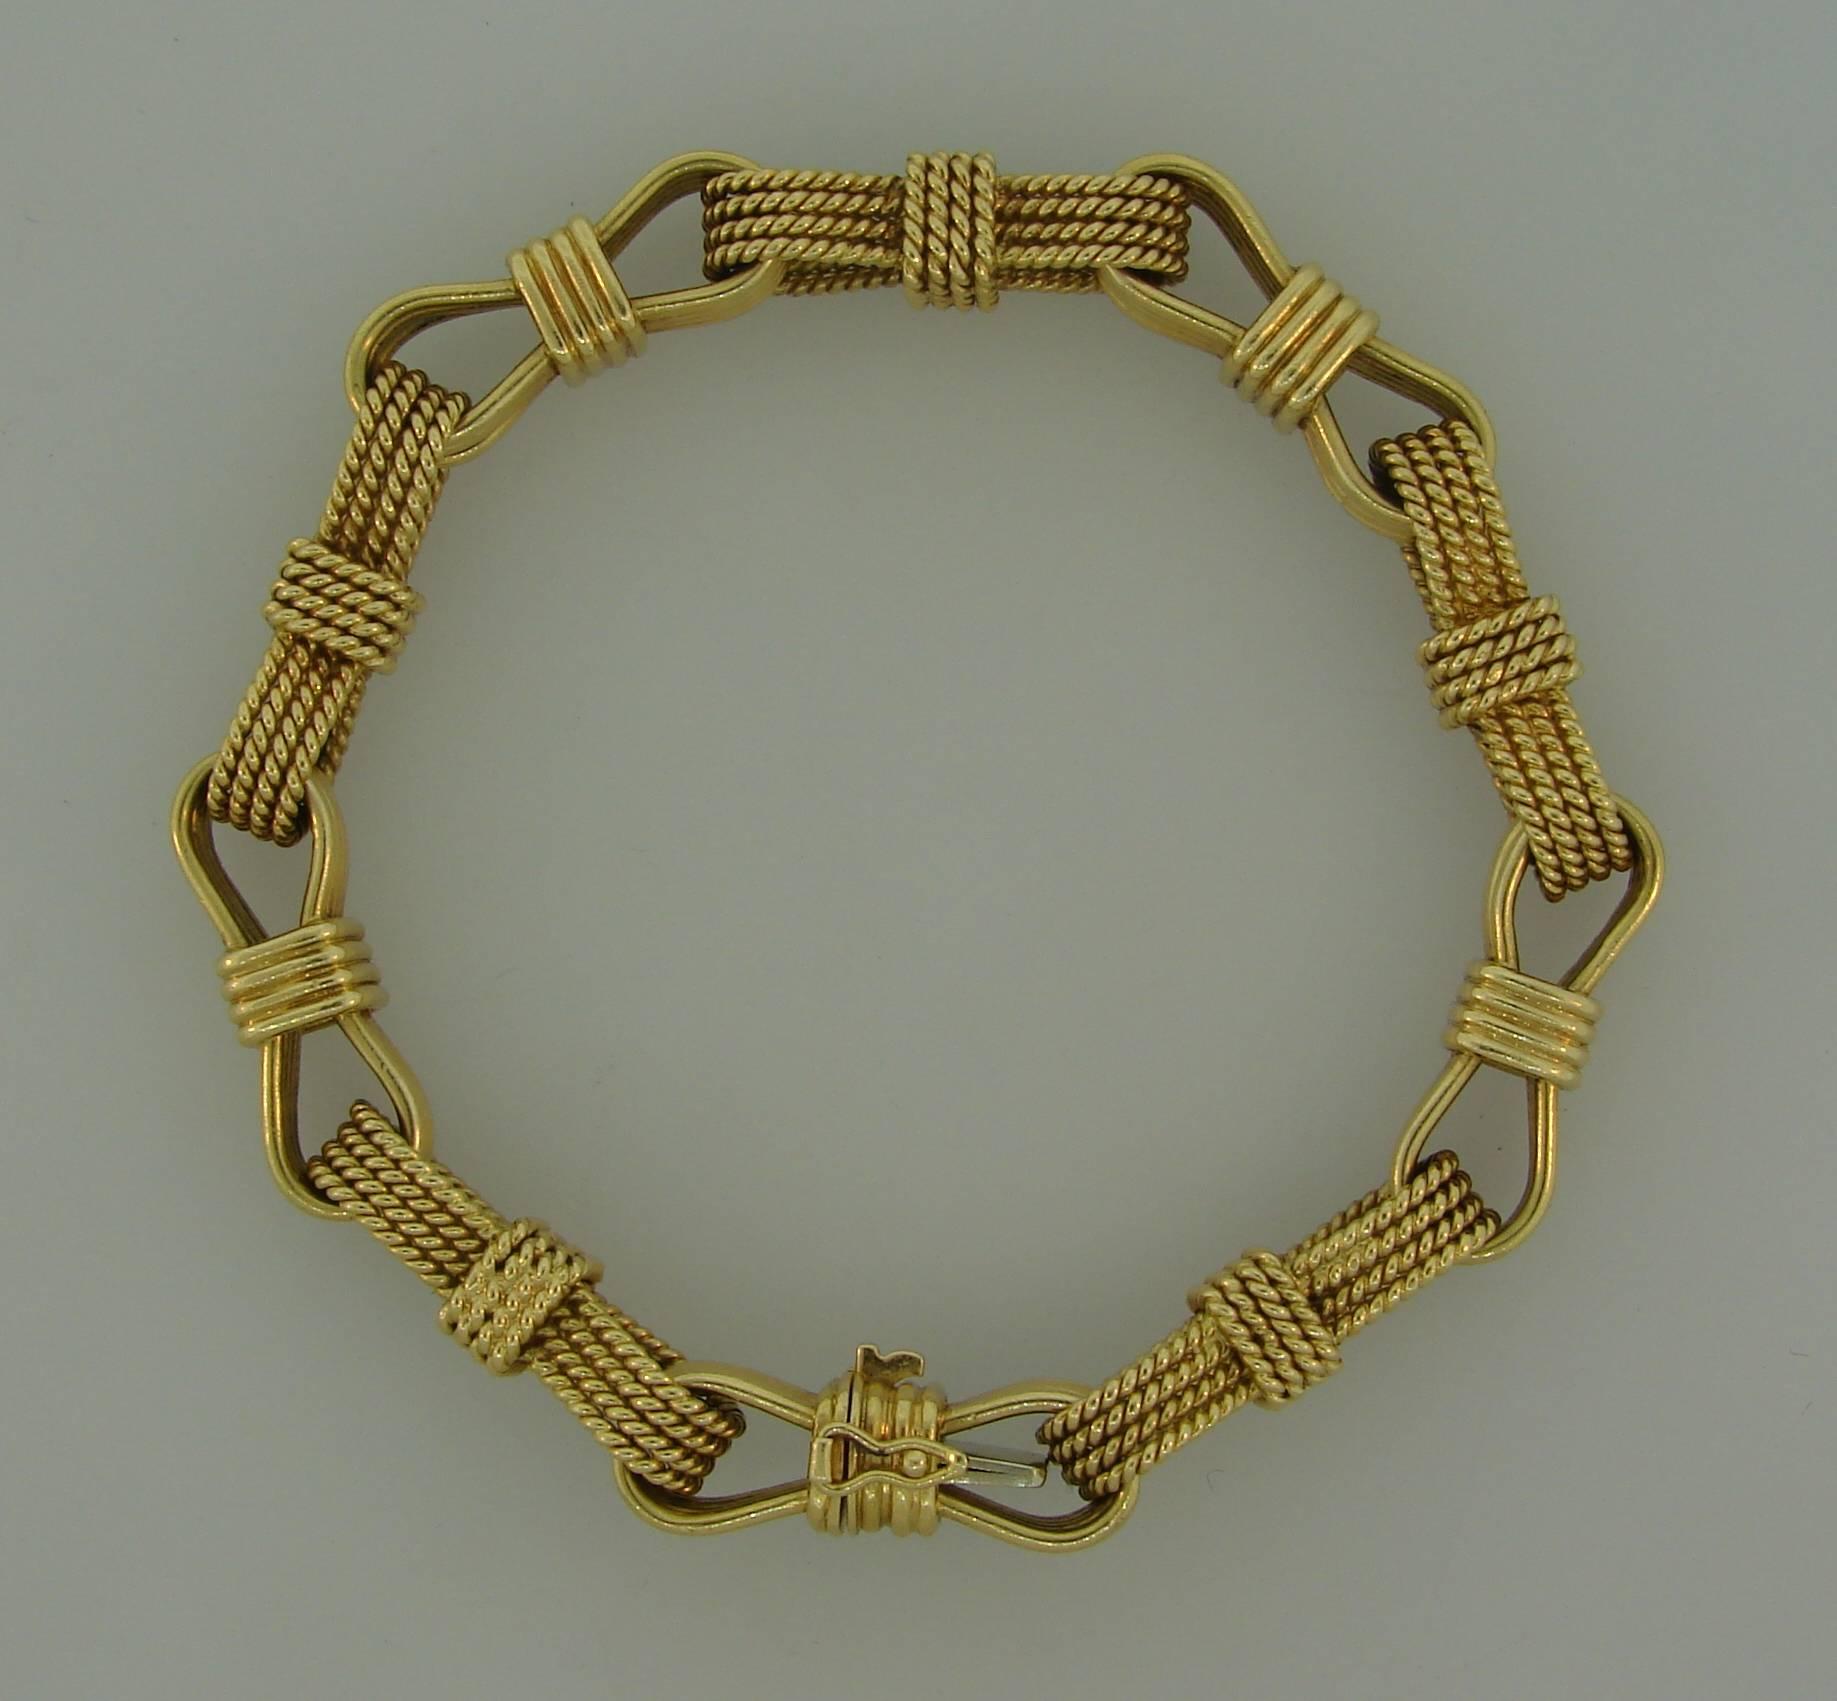 Bold yet elegant bracelet created by Bulgari in Italy in the 1970's.
Classic, timeless and wearable, it is a great addition to your jewelry collection. 
The bracelet is made of 18 karat yellow gold, is 8 inches (20.3 cm) long, 1/4 inch (0.64 cm)